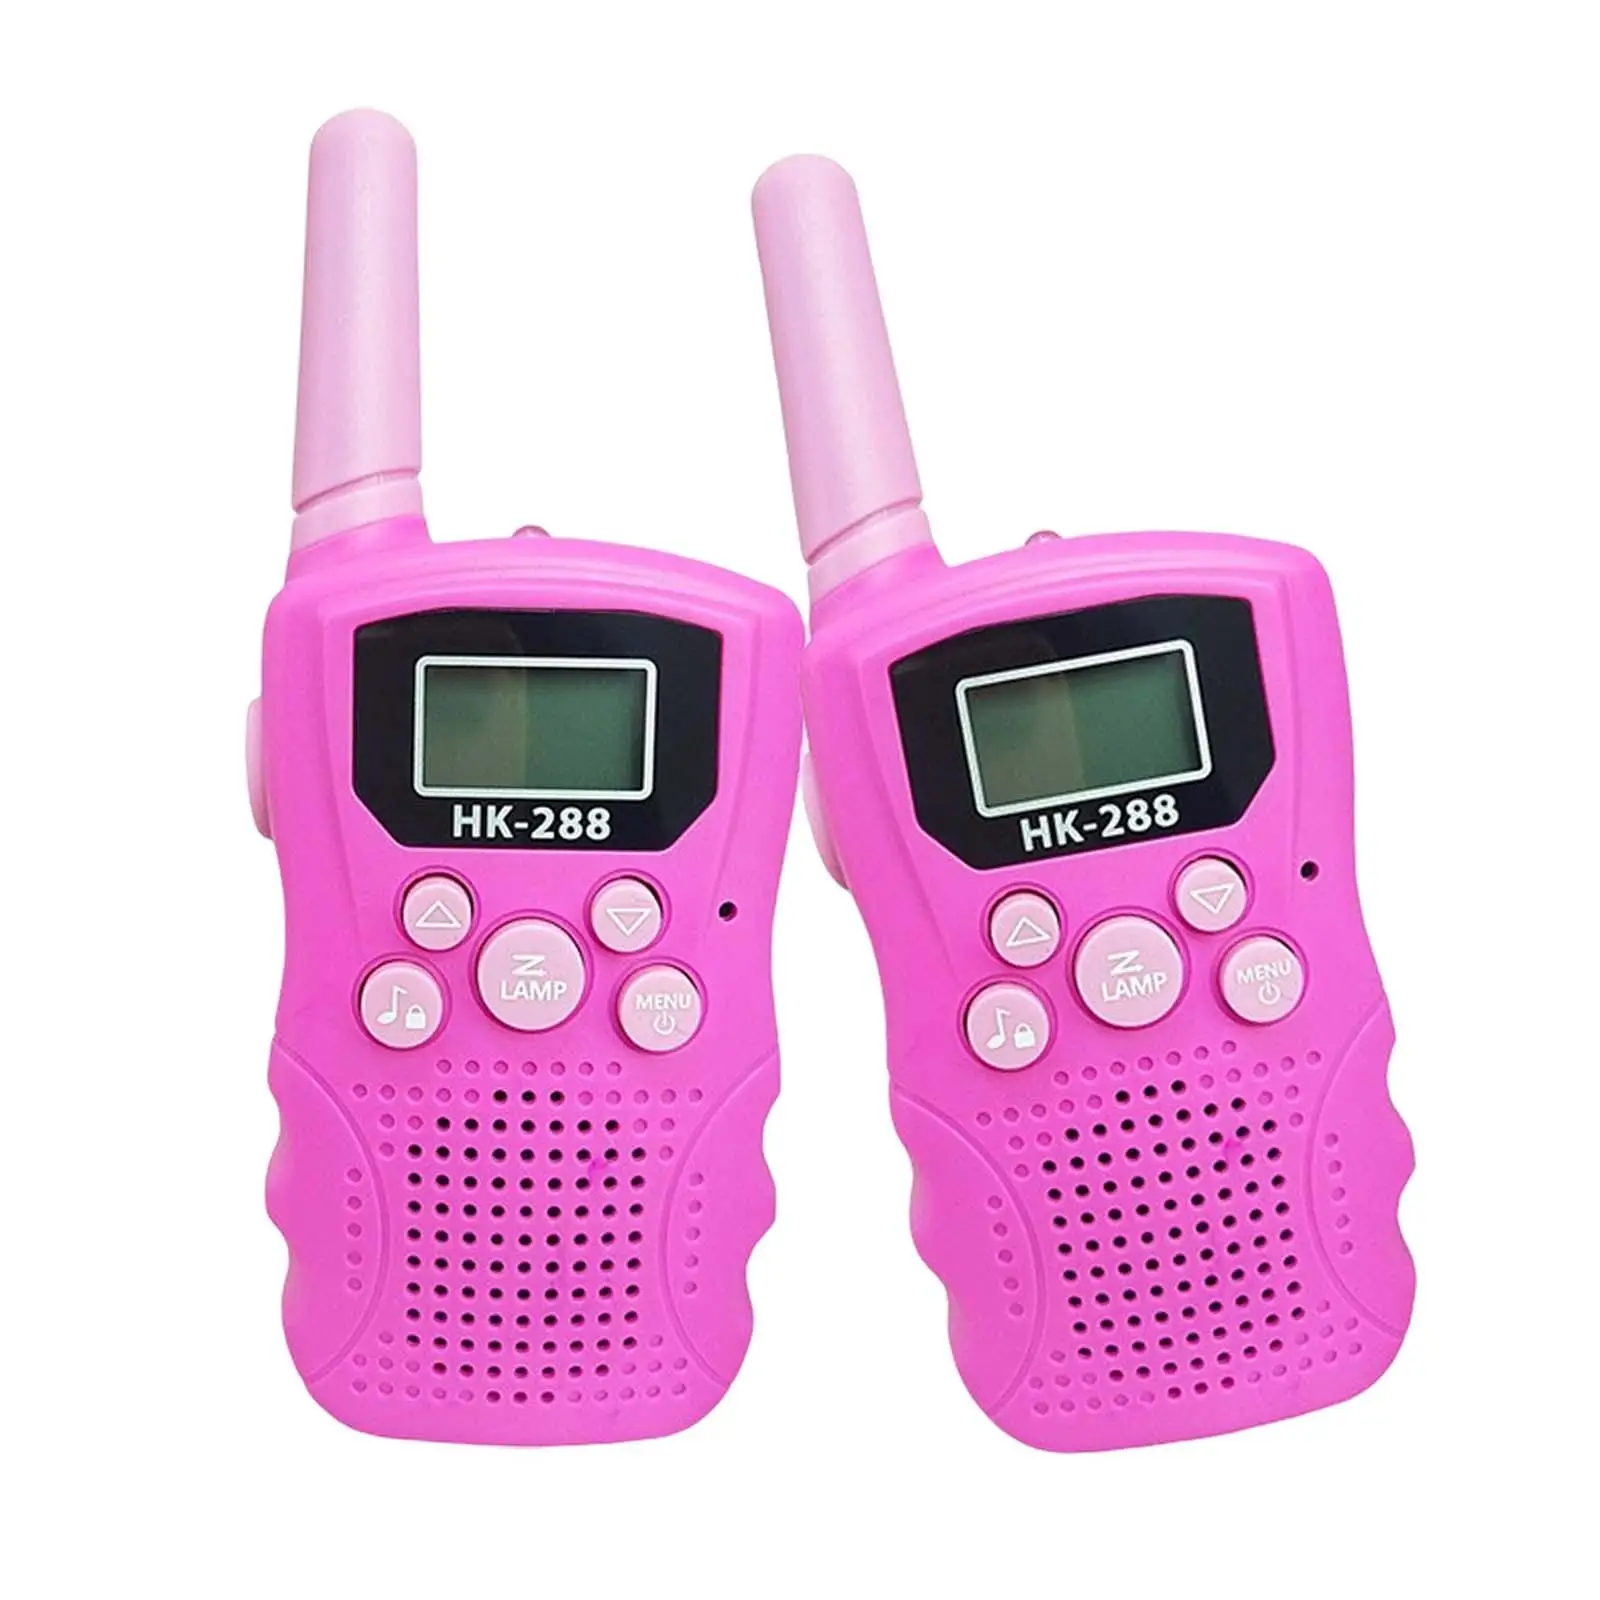 1Pair Walkie Talkie Children 22 Channels with Flashlight Talky for 3-12 Years Old Camping Family Games Teens Hiking Outside